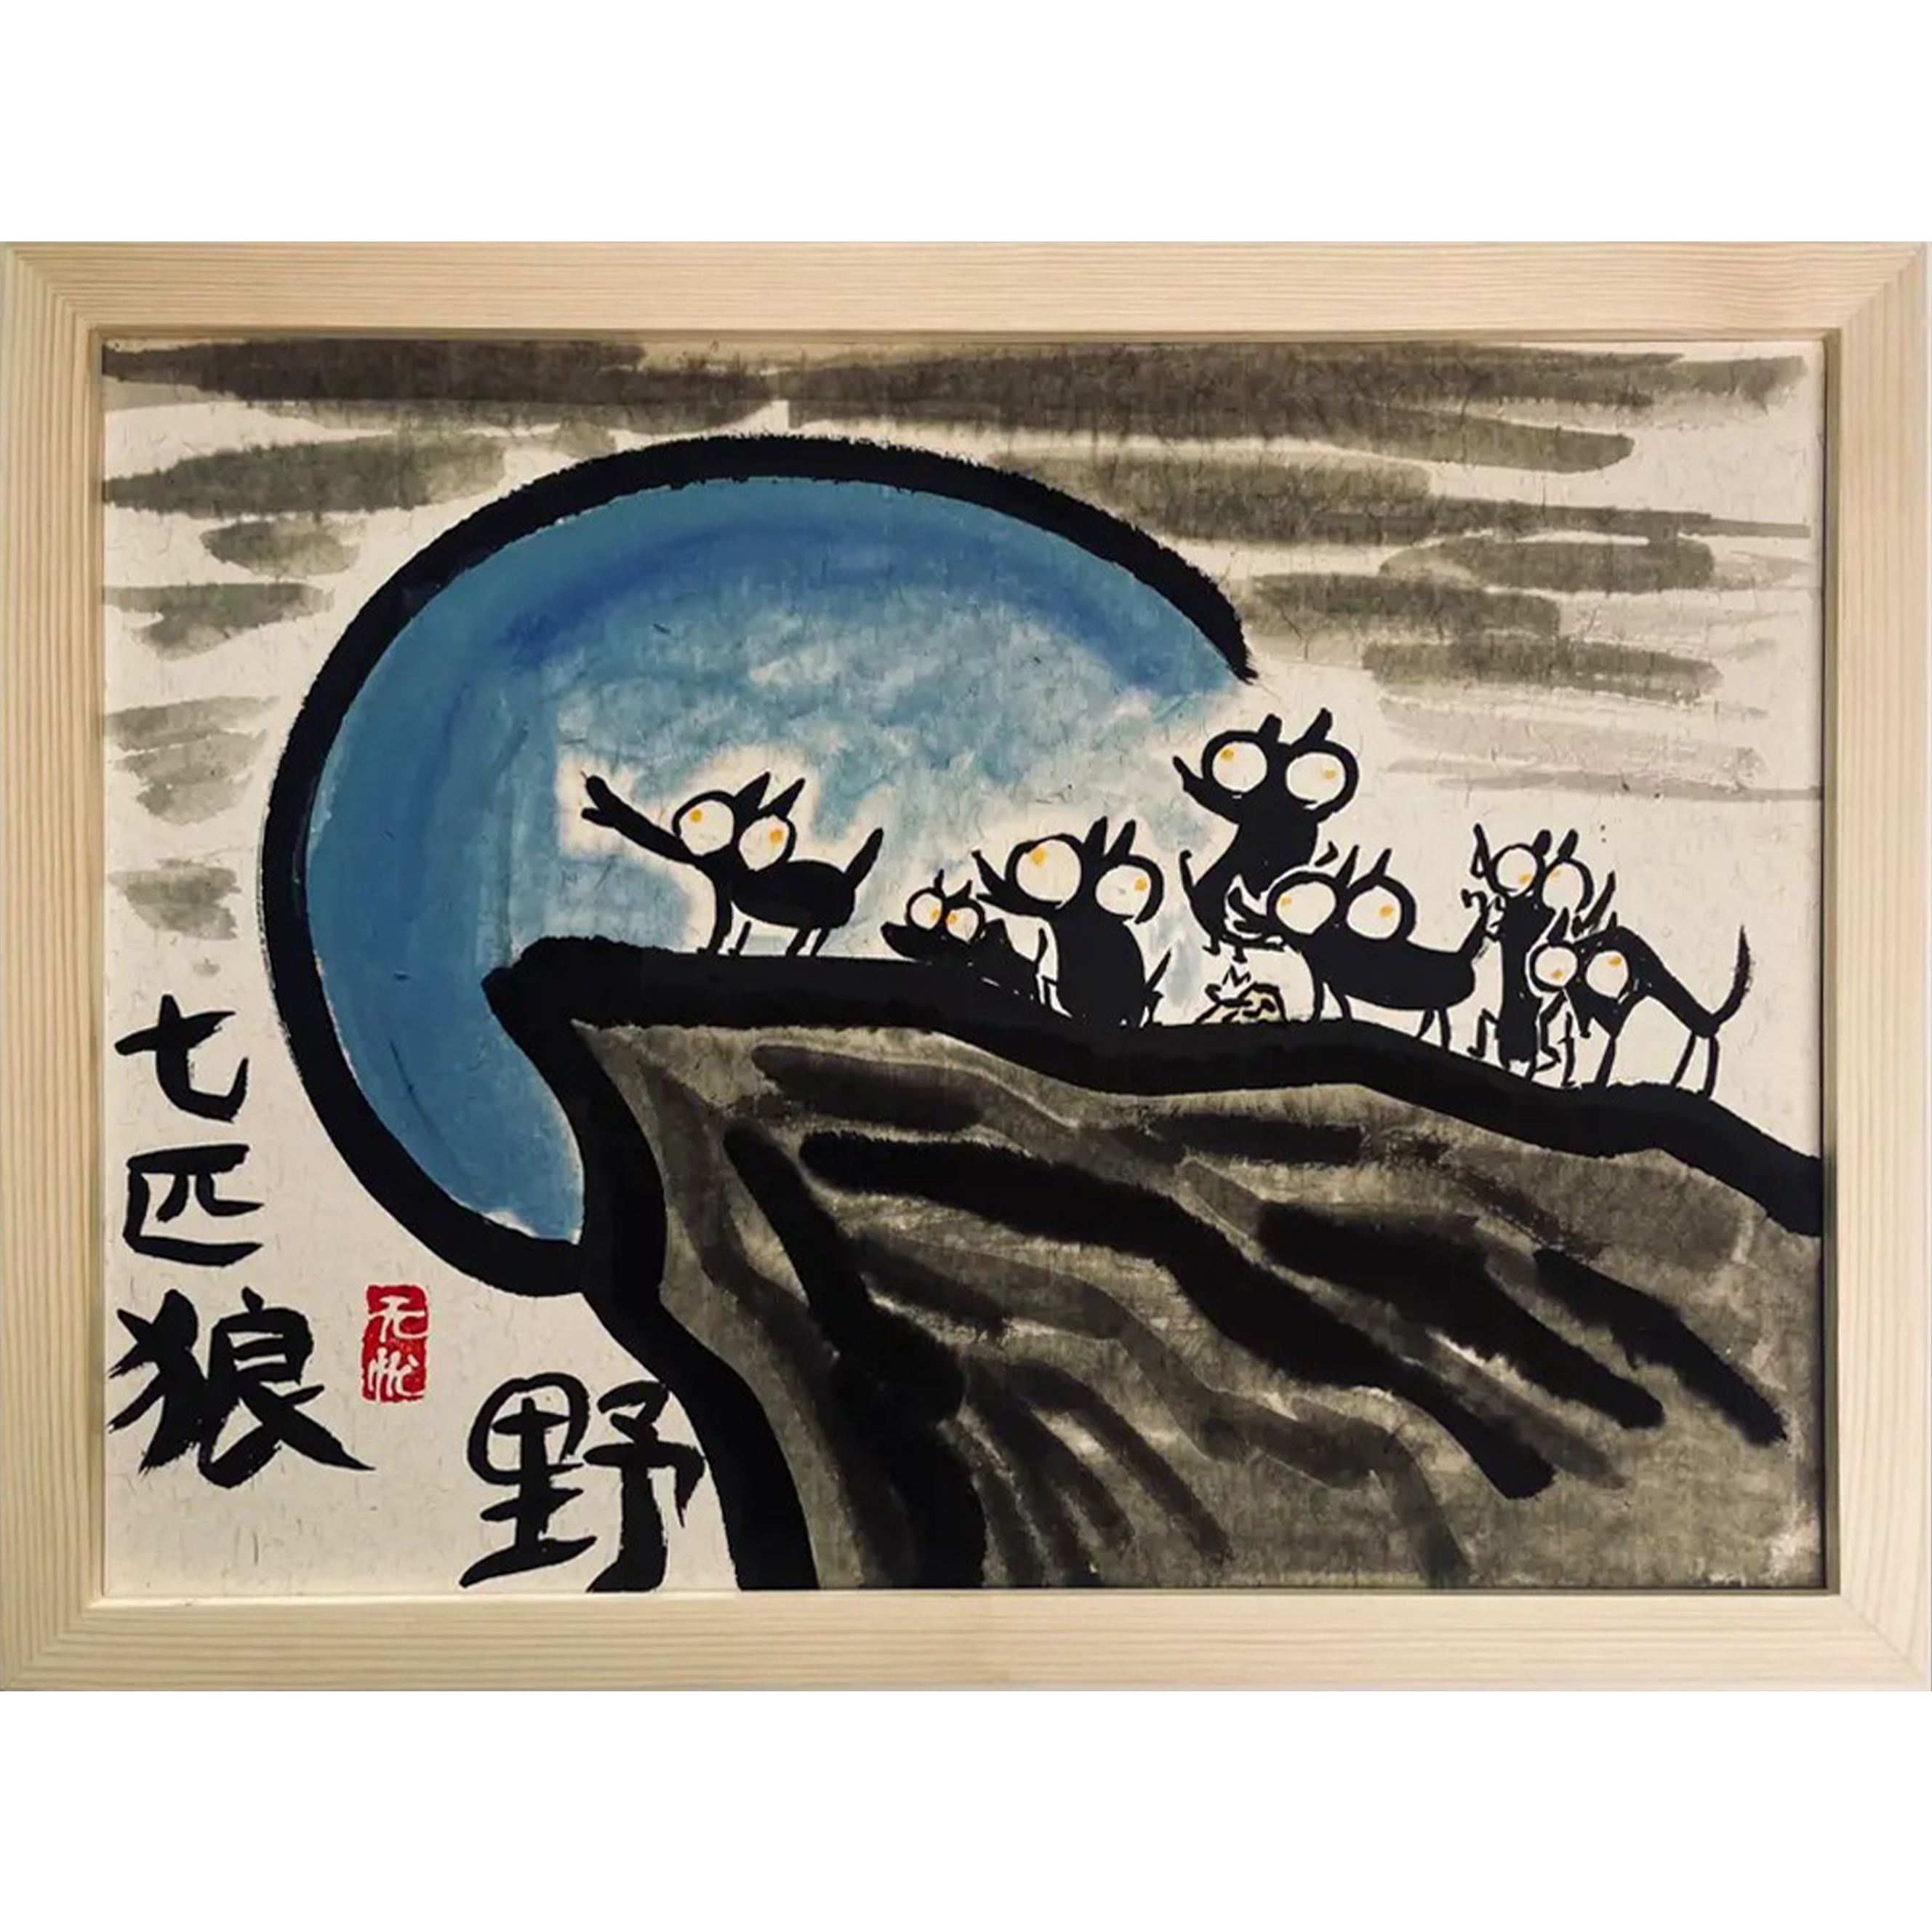 General 2657x2657 humor wolf Moon animals picture frames wood artwork cliff herd Chinese kanji